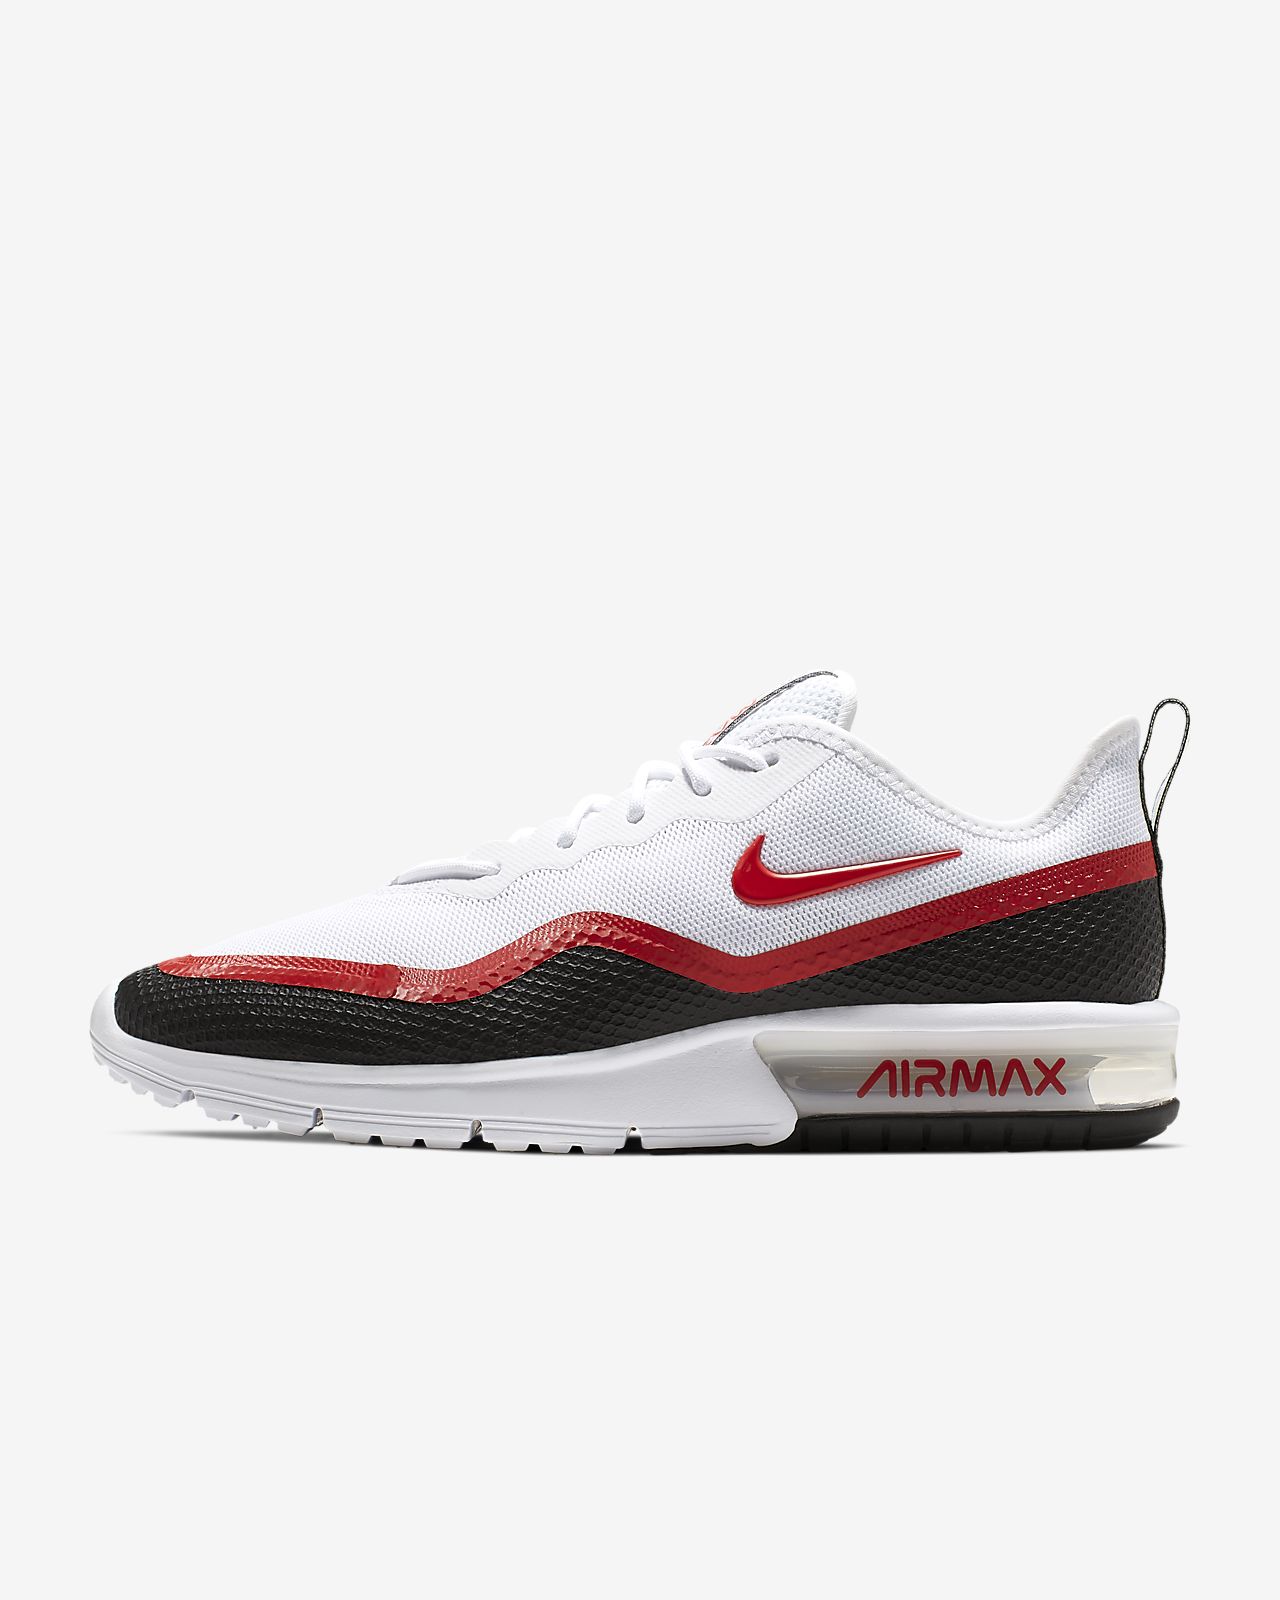 nike air max sequent homme